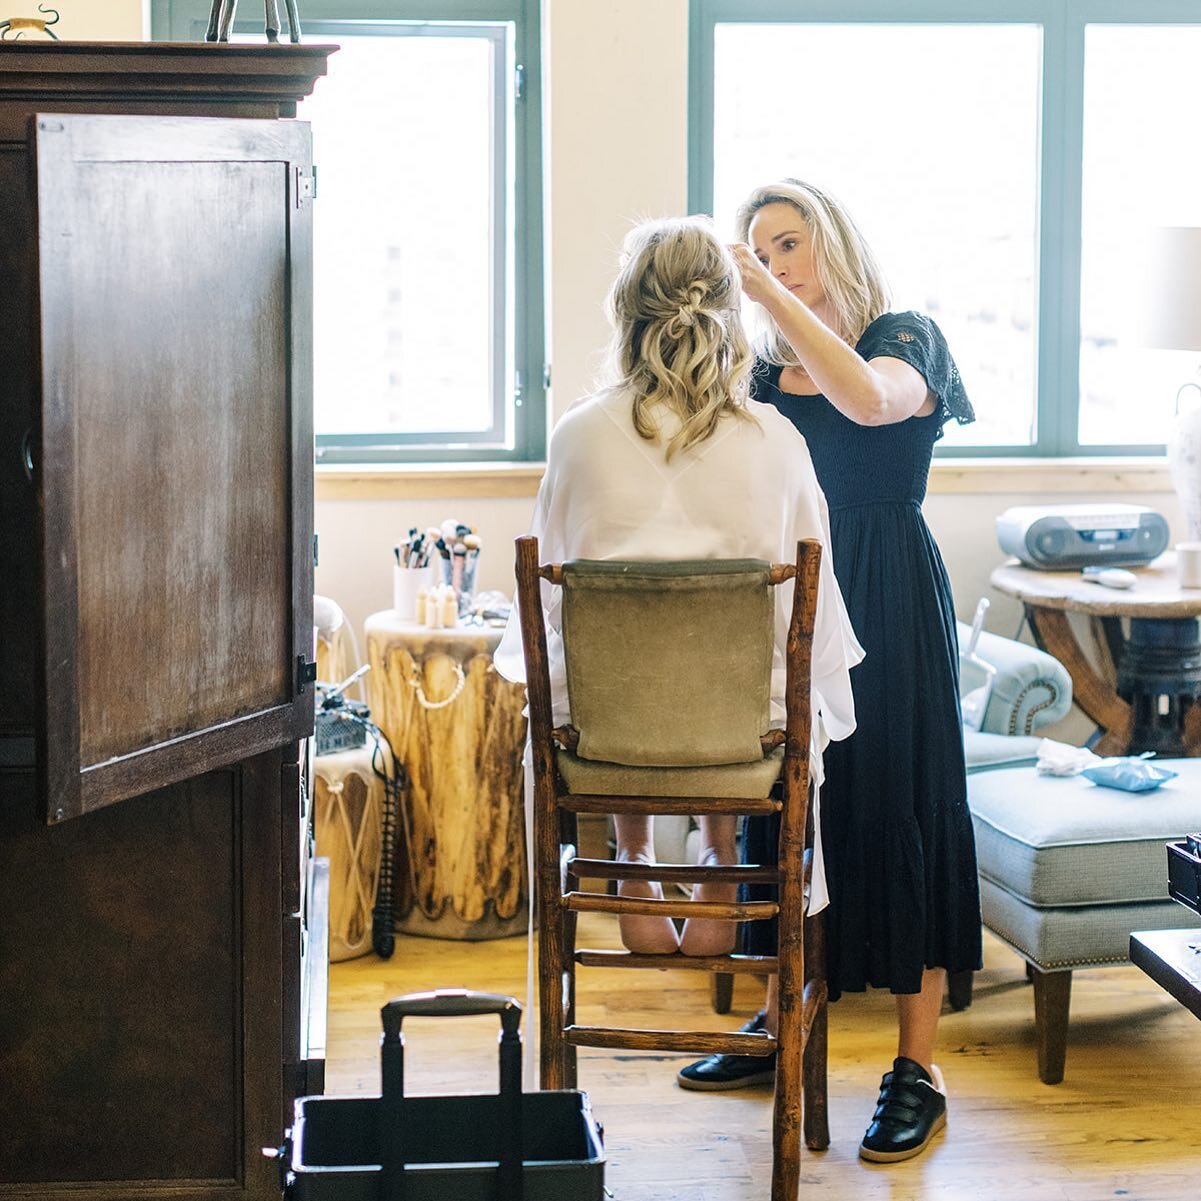 I love my job! I feel so fortunate to be a part of women feeling beautiful inside and out. #womensupportingwomen #makeupartist #bestself #coloradomua #mua #steamboatmakeupartistry #rockymountainbride #steamboatbride #coloradowedding 

Photo: @sarahpo